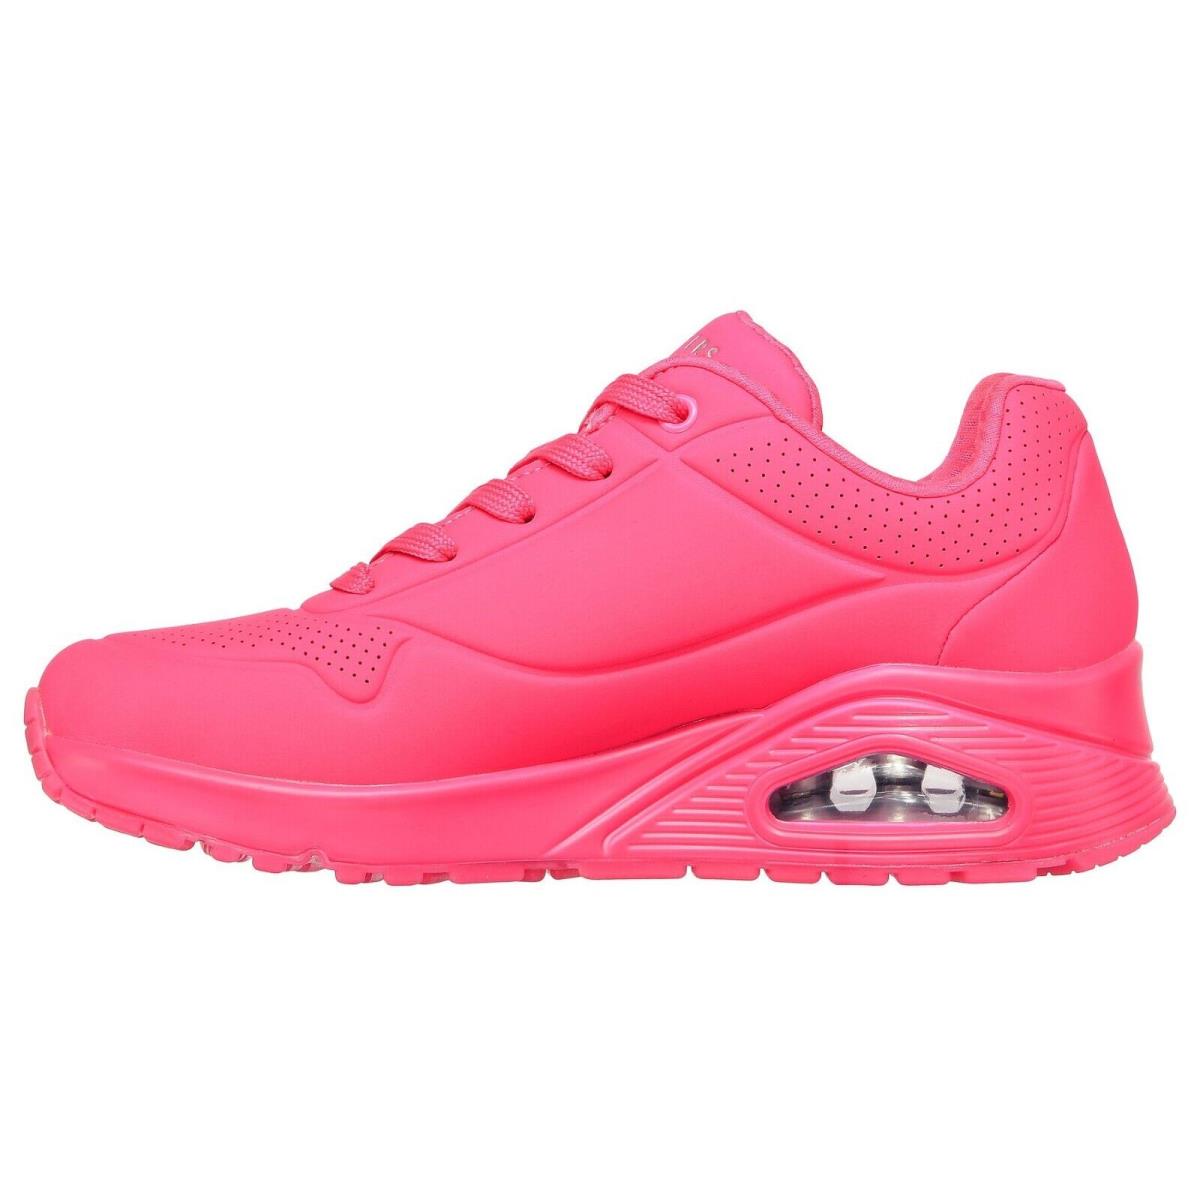 Skechers shoes Uno Night Shades - Hot Pink 9